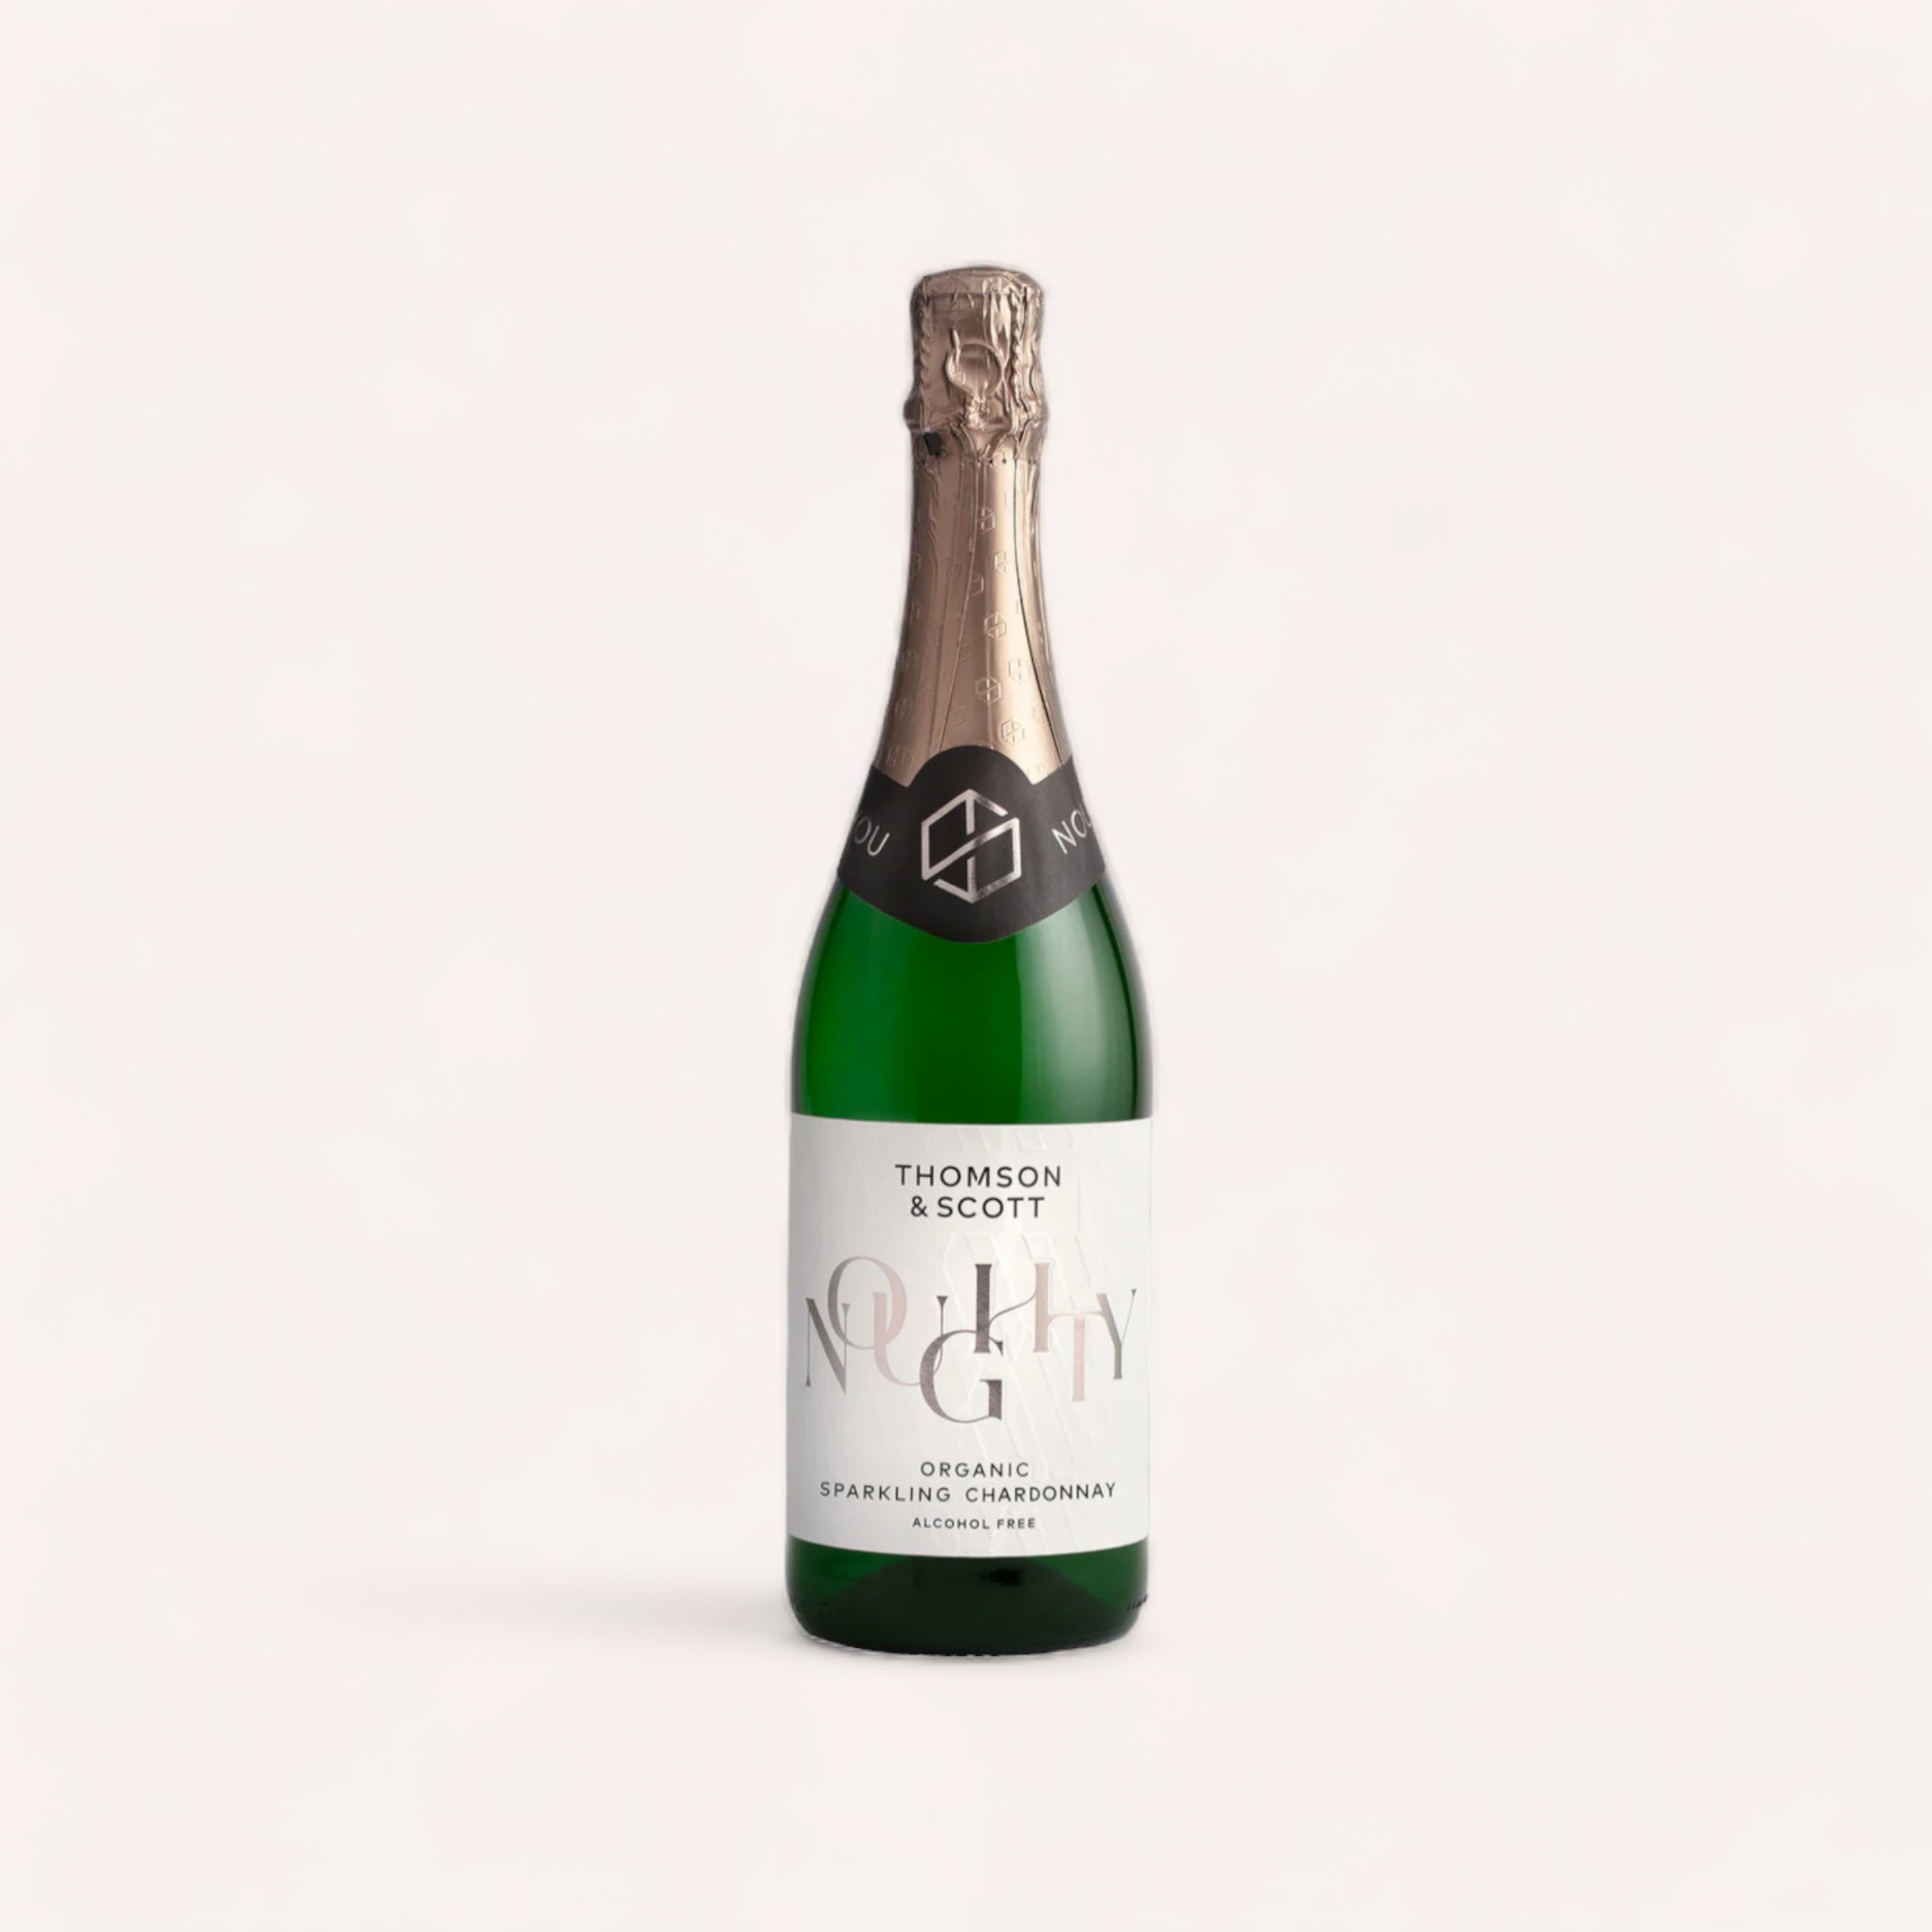 A single bottle of Thomson & Scott Noughty Sparkling Chardonnay organic vegan halal Zero Alcohol wine displayed against a clean, neutral background.